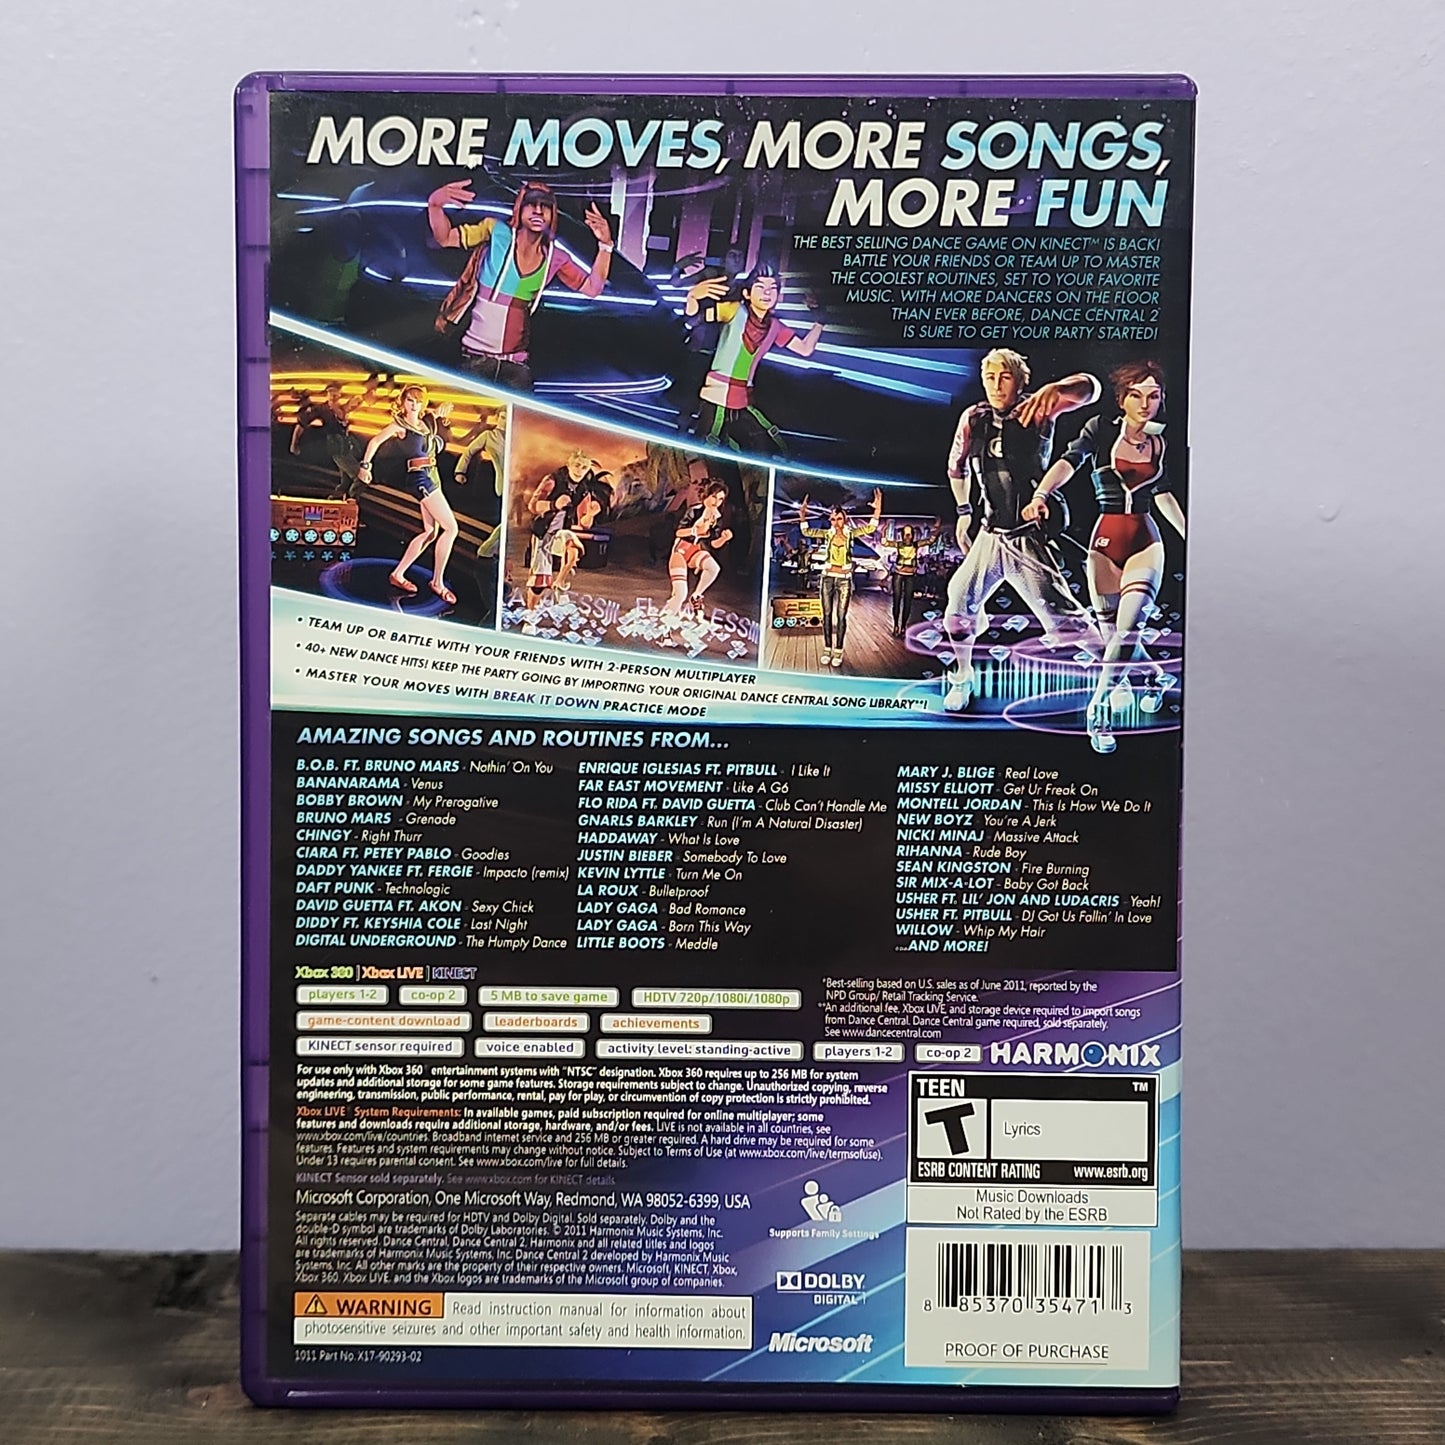 Xbox 360 - Dance Central 2 Retrograde Collectibles CIB, Dance, Dance Central, Harmonix, Kinect, Microsoft, Music, T Rated, Xbox, Xbox 360 Preowned Video Game 